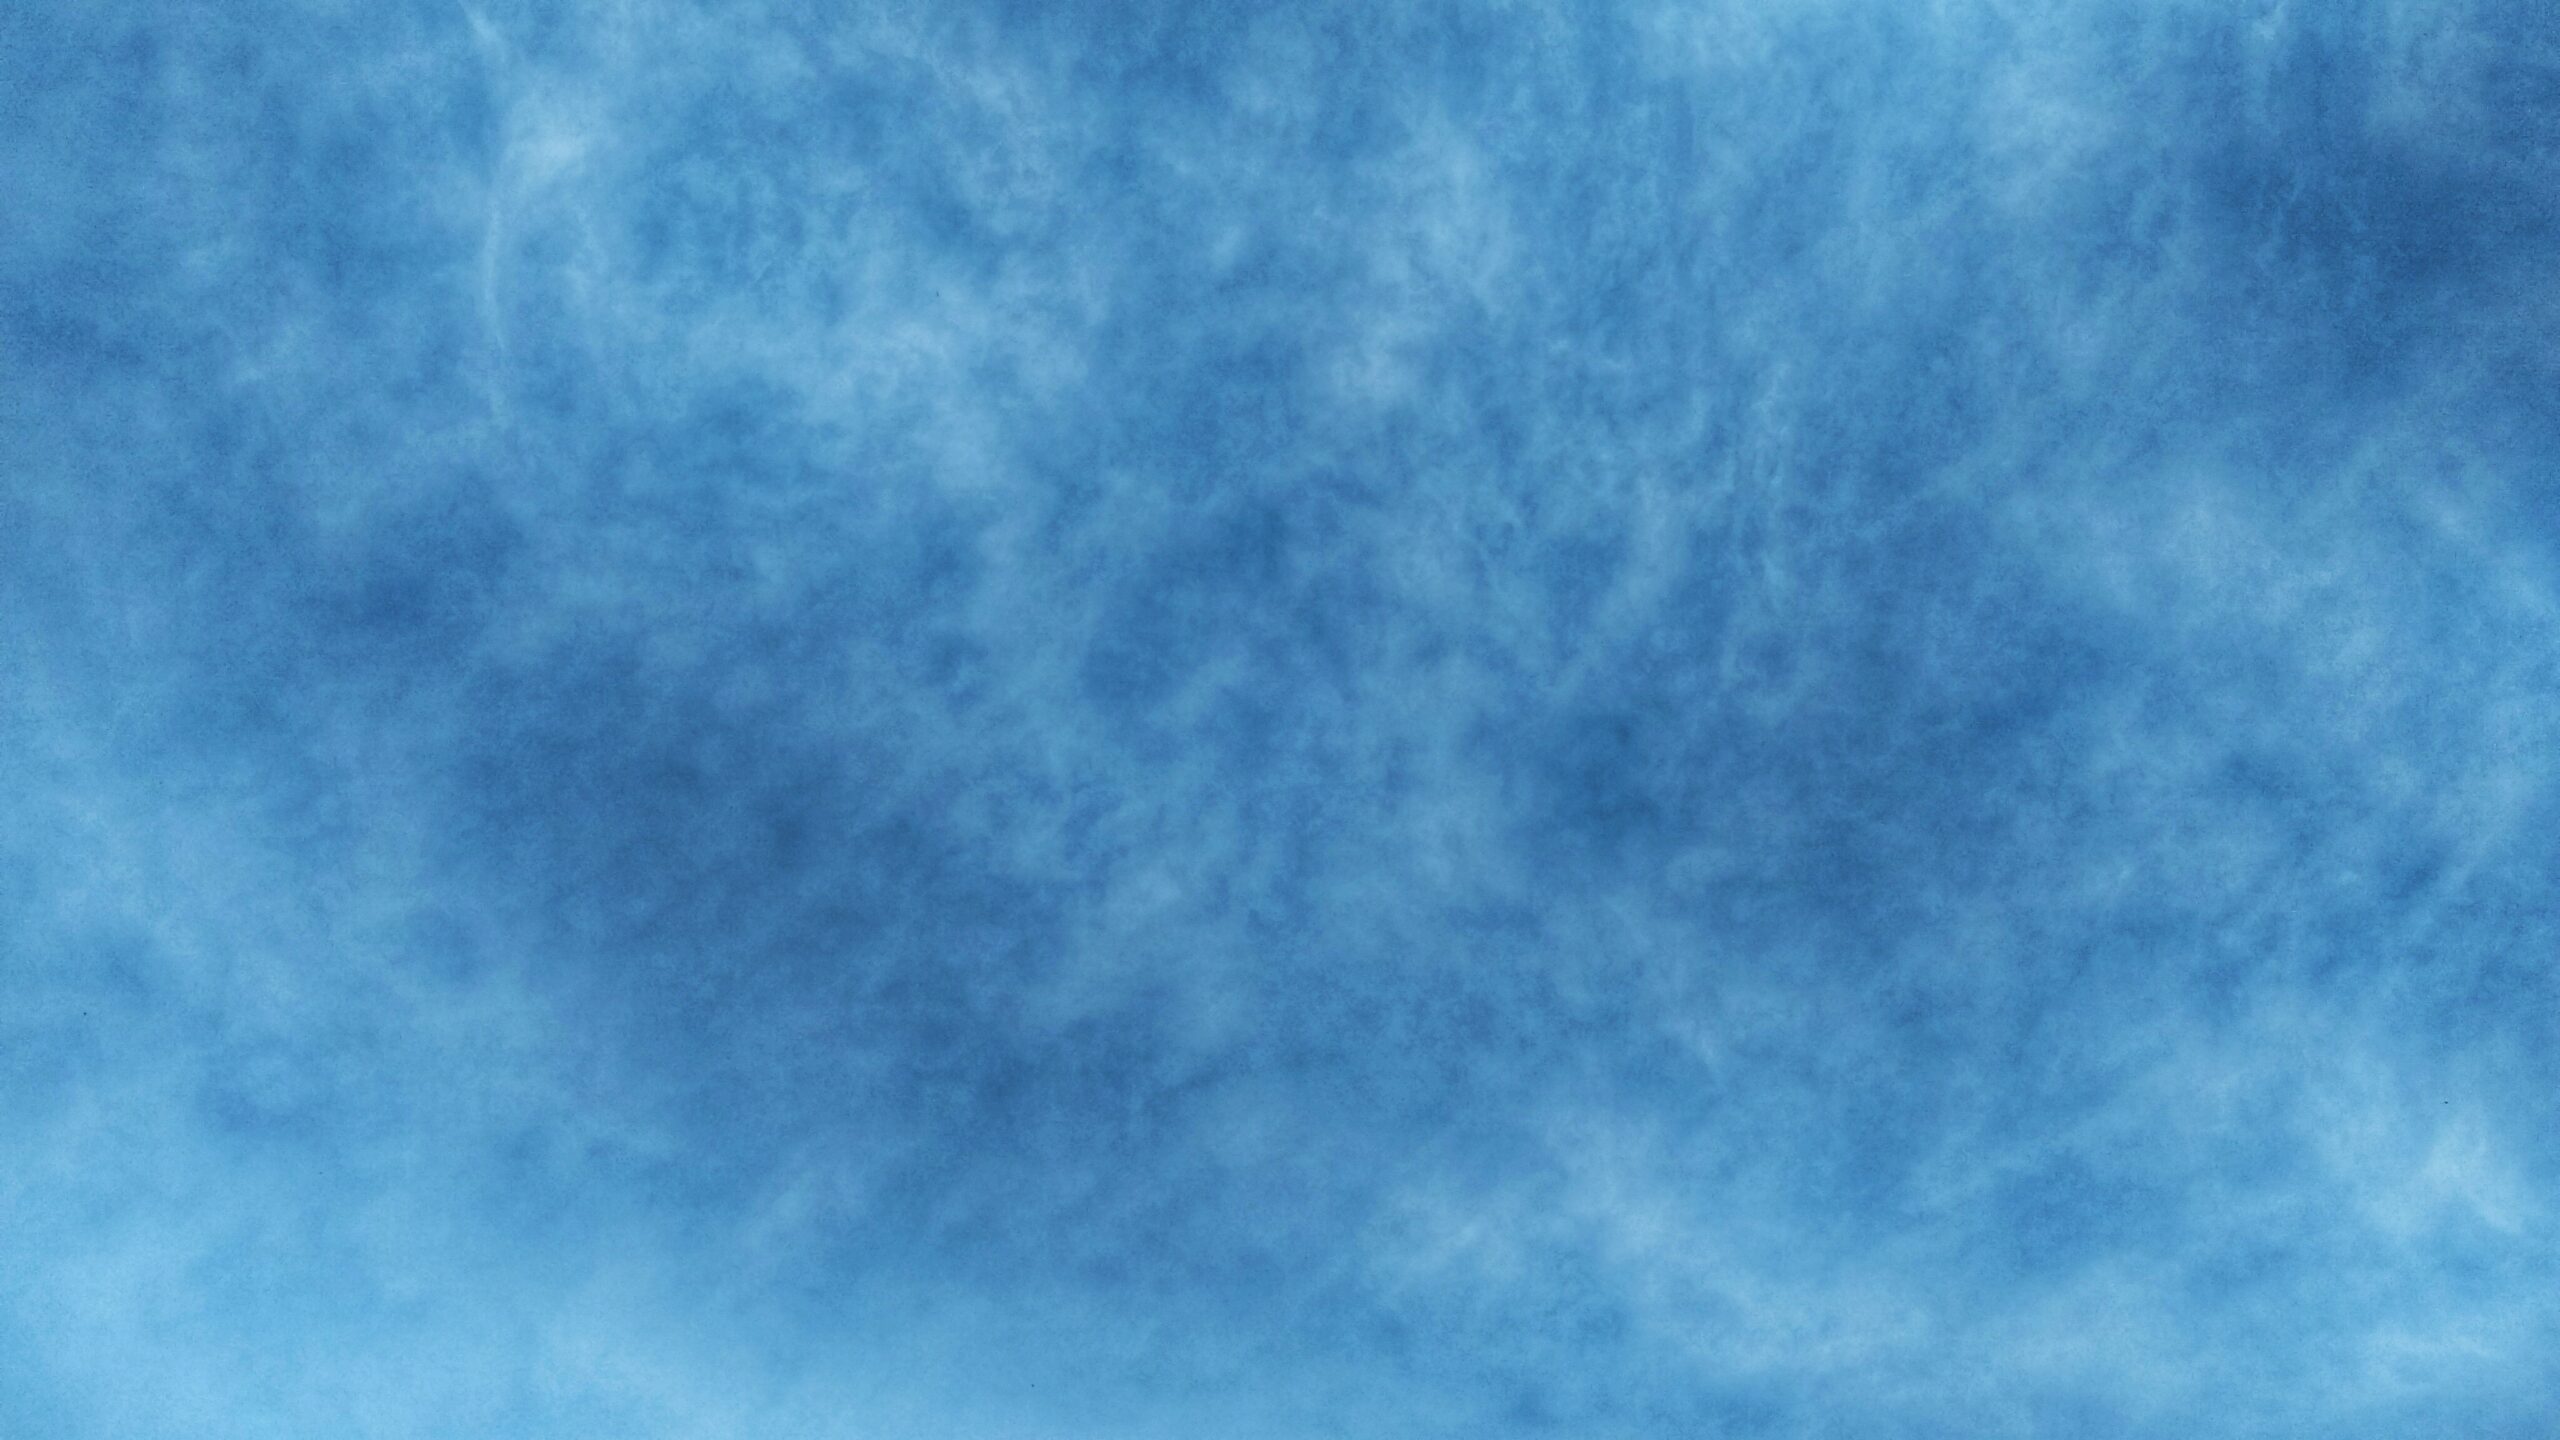 Vibrant blue sky with cirrus clouds